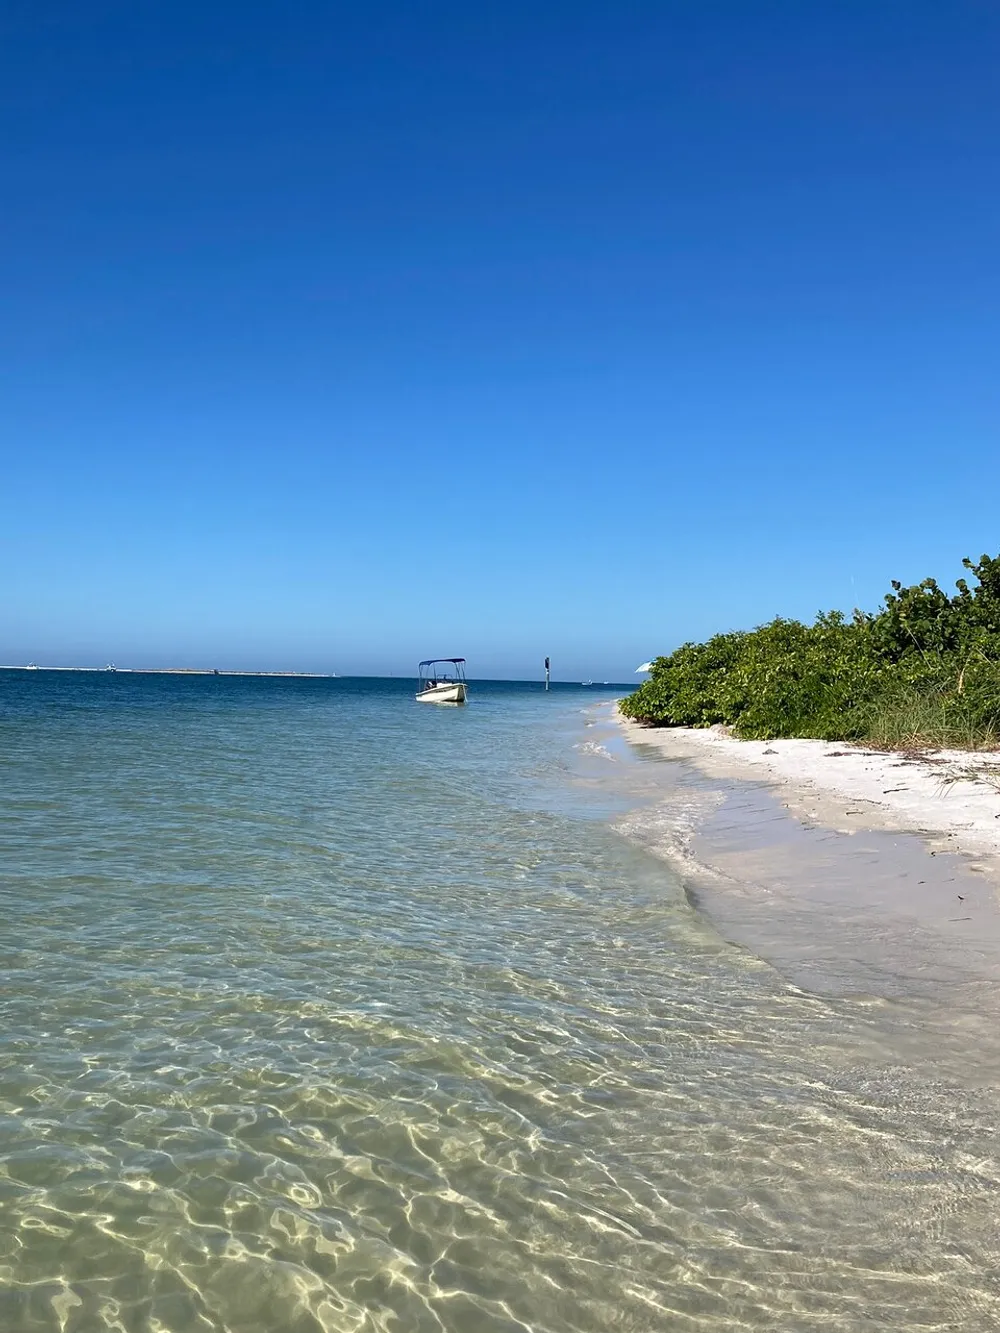 The image shows a serene beach scene with clear turquoise waters a stretch of white sand green vegetation to the side and a solitary boat floating near the shore under a vast blue sky